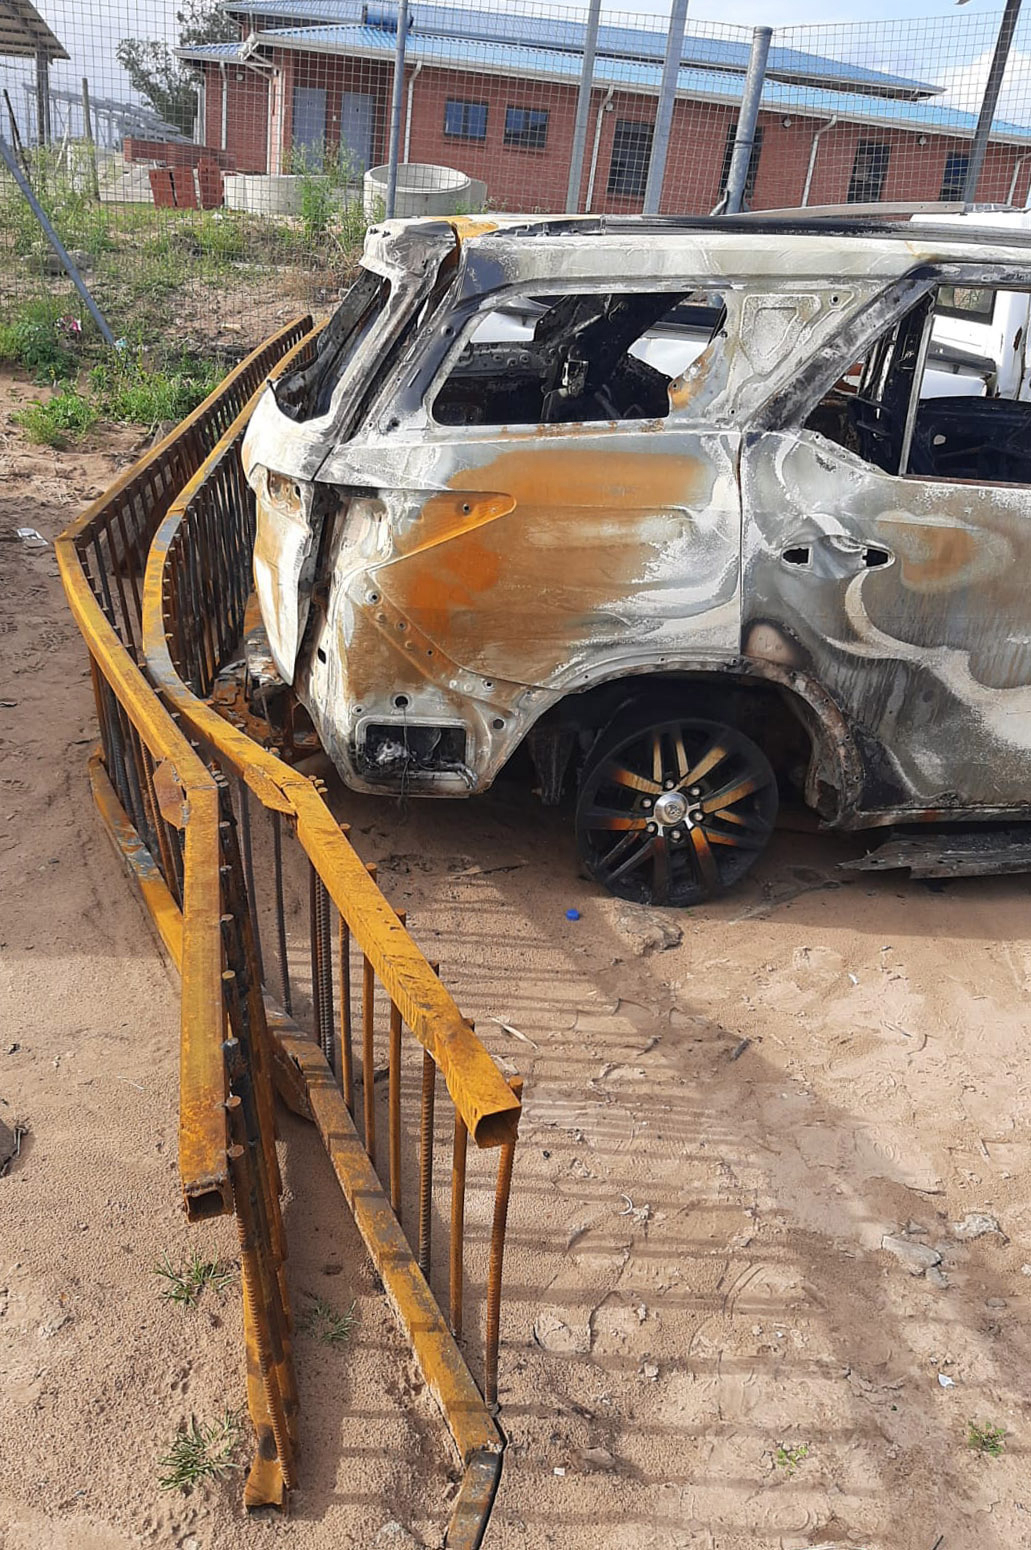 Mozambican Government Outraged by Repeated Attacks on Mozambican-Registered Cars in South Africa | The African Exponent.